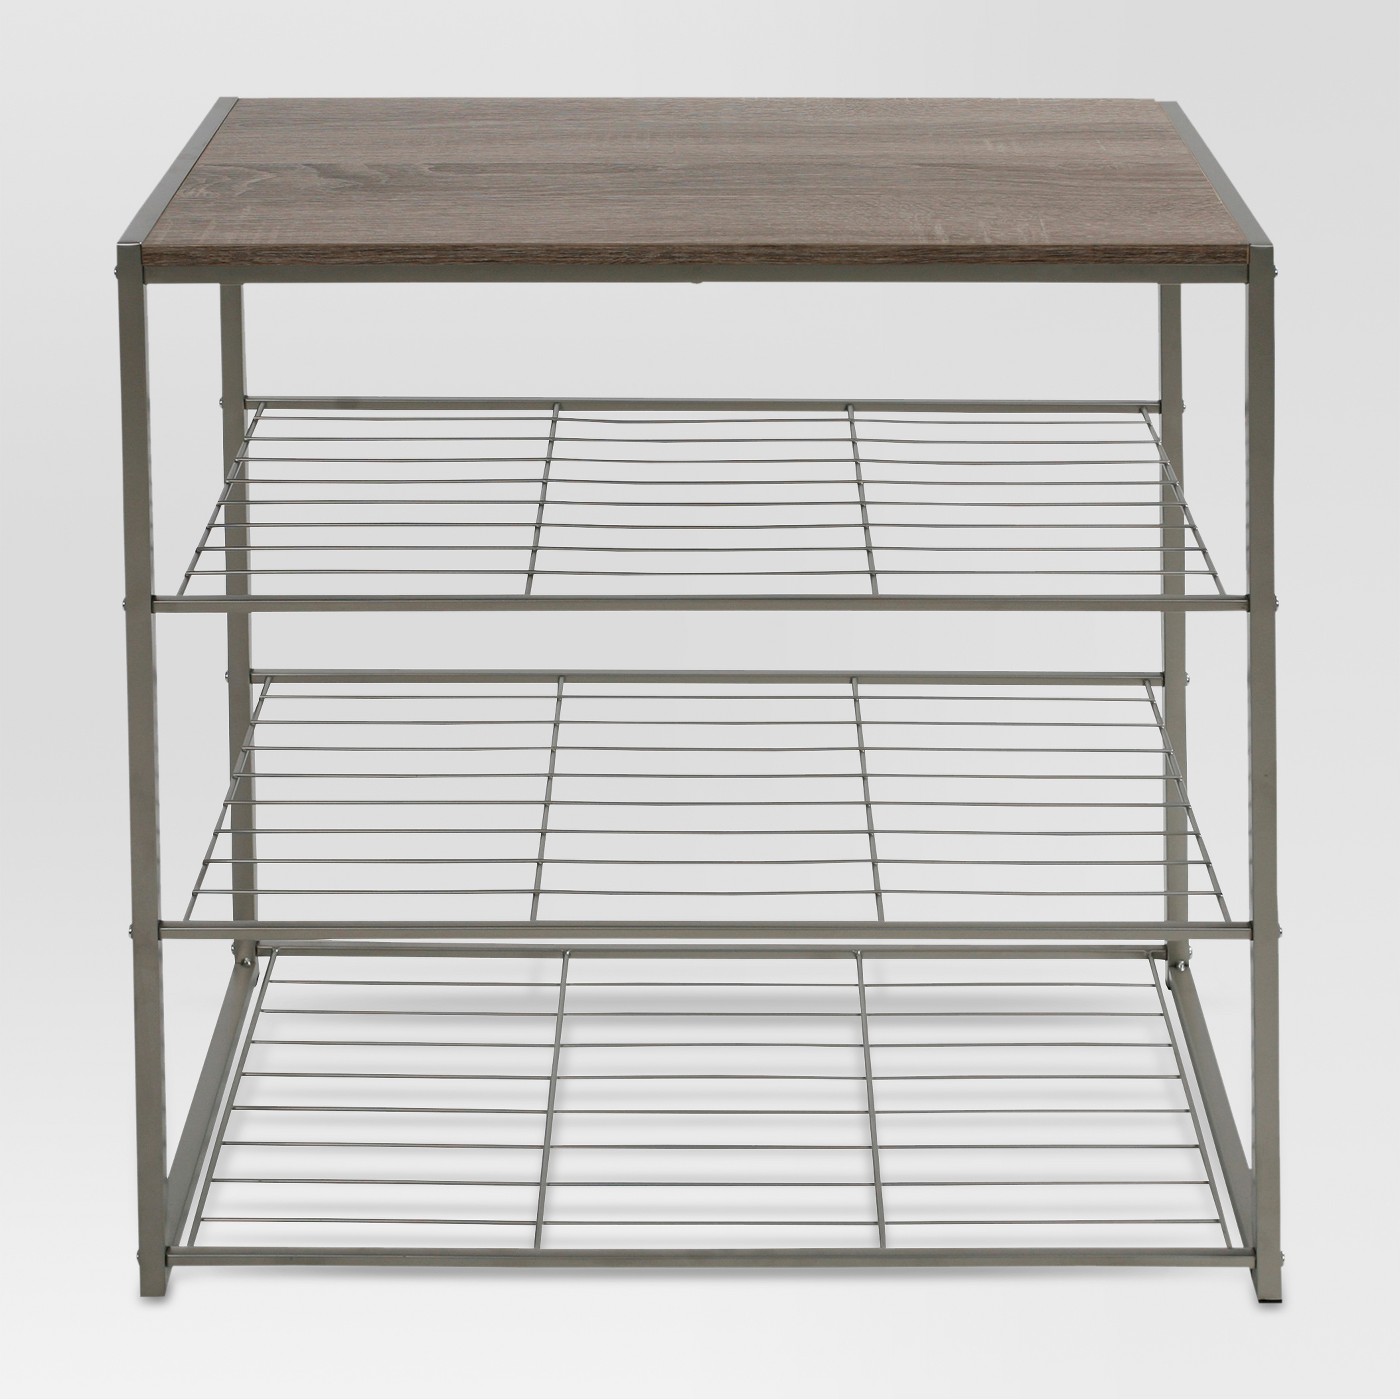 4 Tier Shoe Rack with partial Board Top Gray - Thresholdâ¢ - image 1 of 4